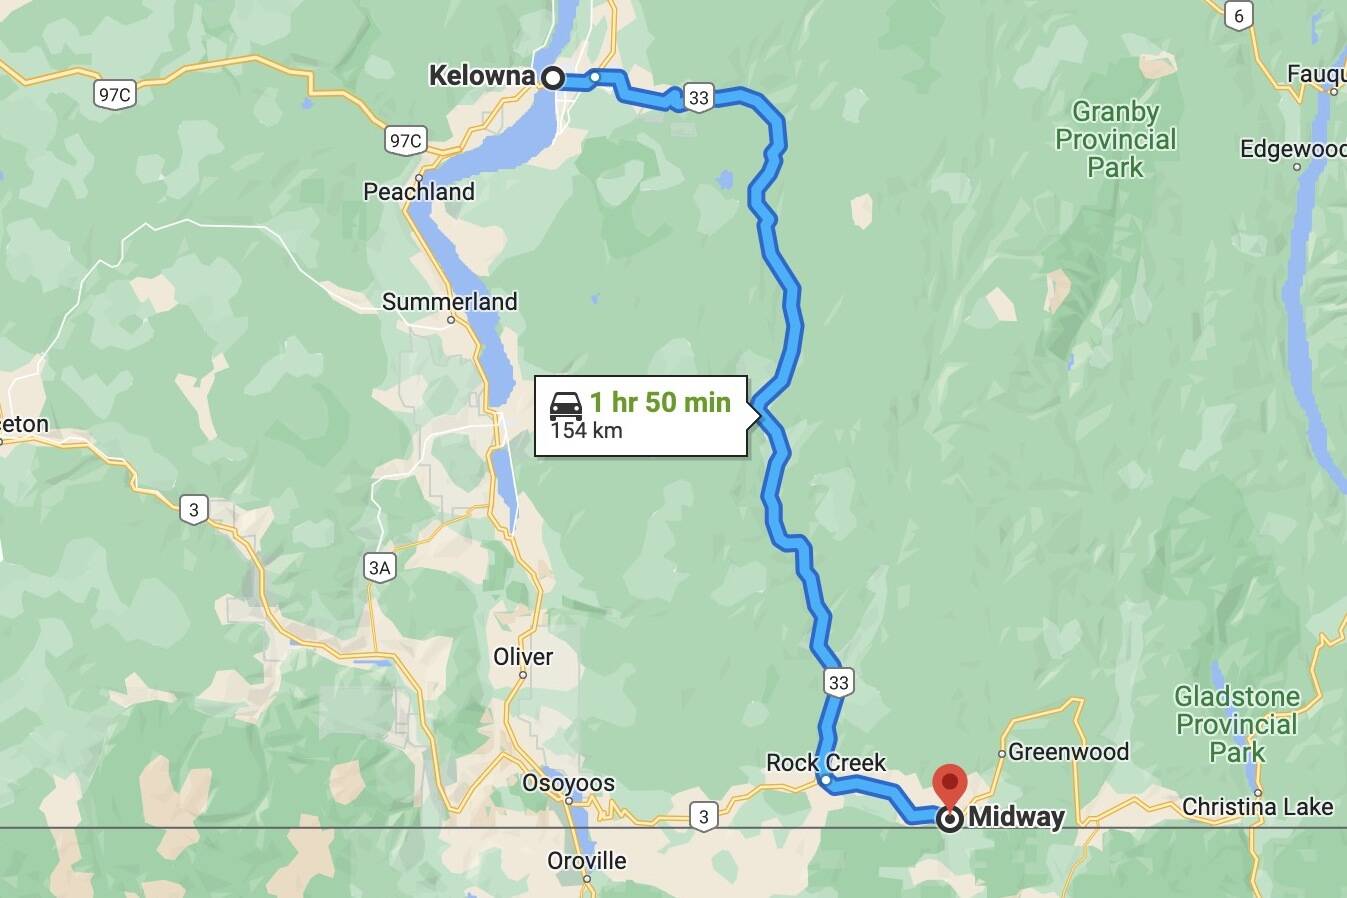 Suspects fled from police in Kelowna, with vehicle being later found in Midway, B.C. (Google Maps)